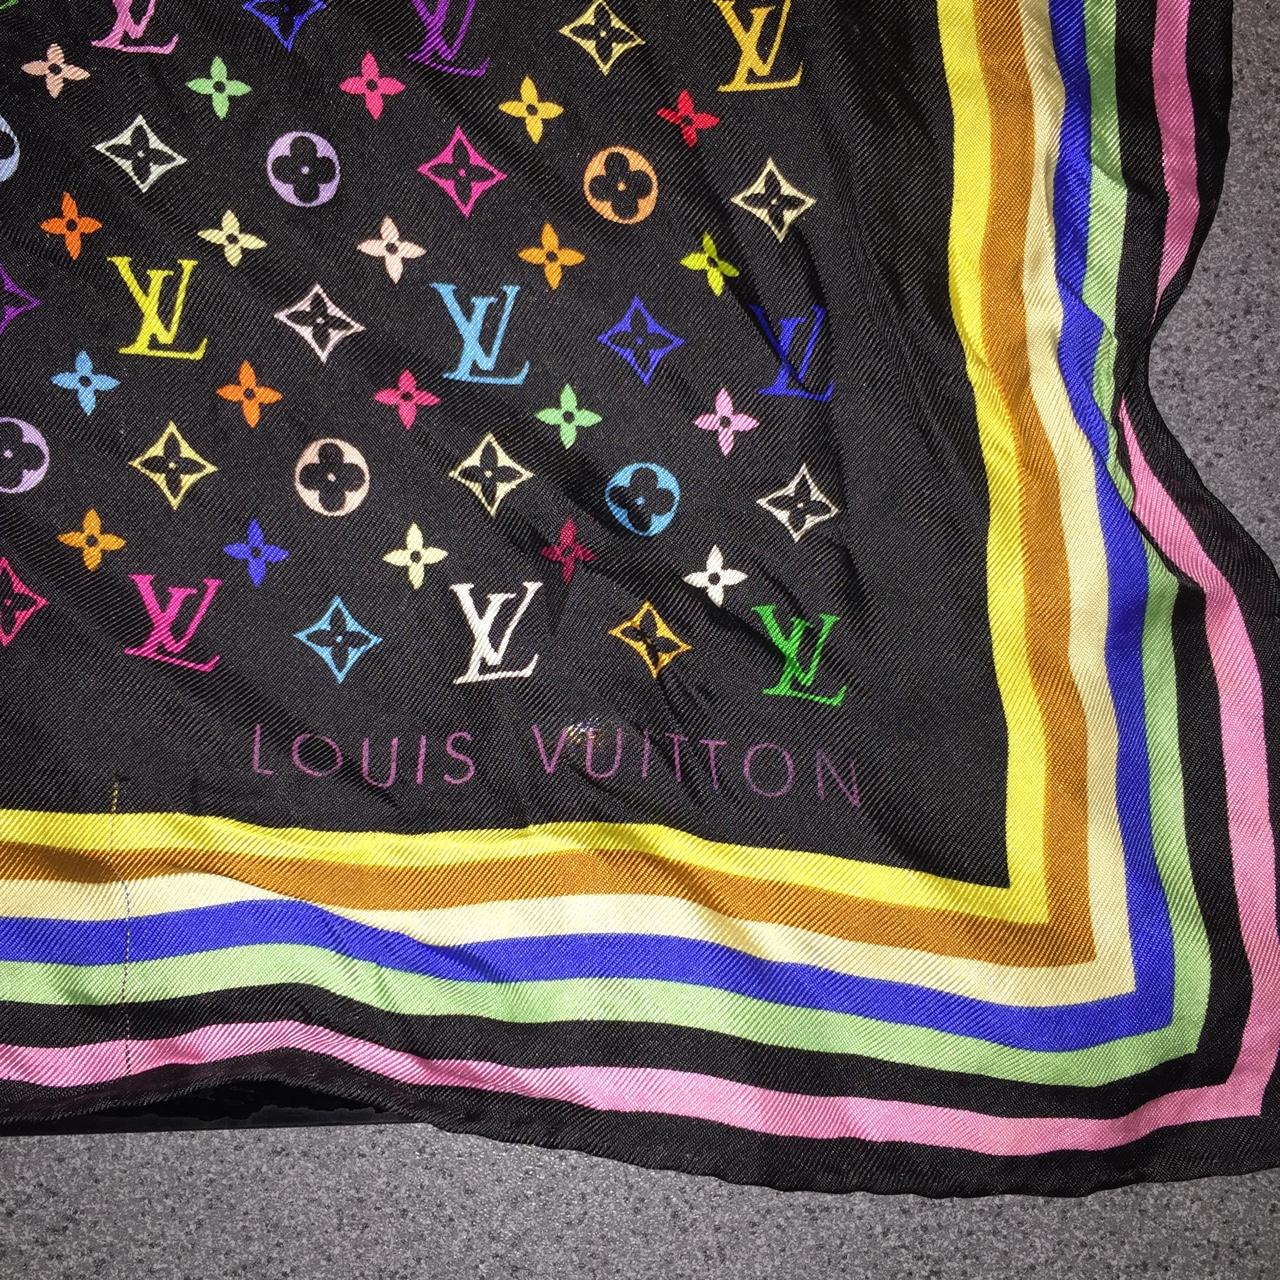 Louis Vuitton Murakami Scarf - 6 For Sale on 1stDibs  takashi murakami  scarf, designer scarf louis vuitton, louis vuitton x takashi murakami scarf